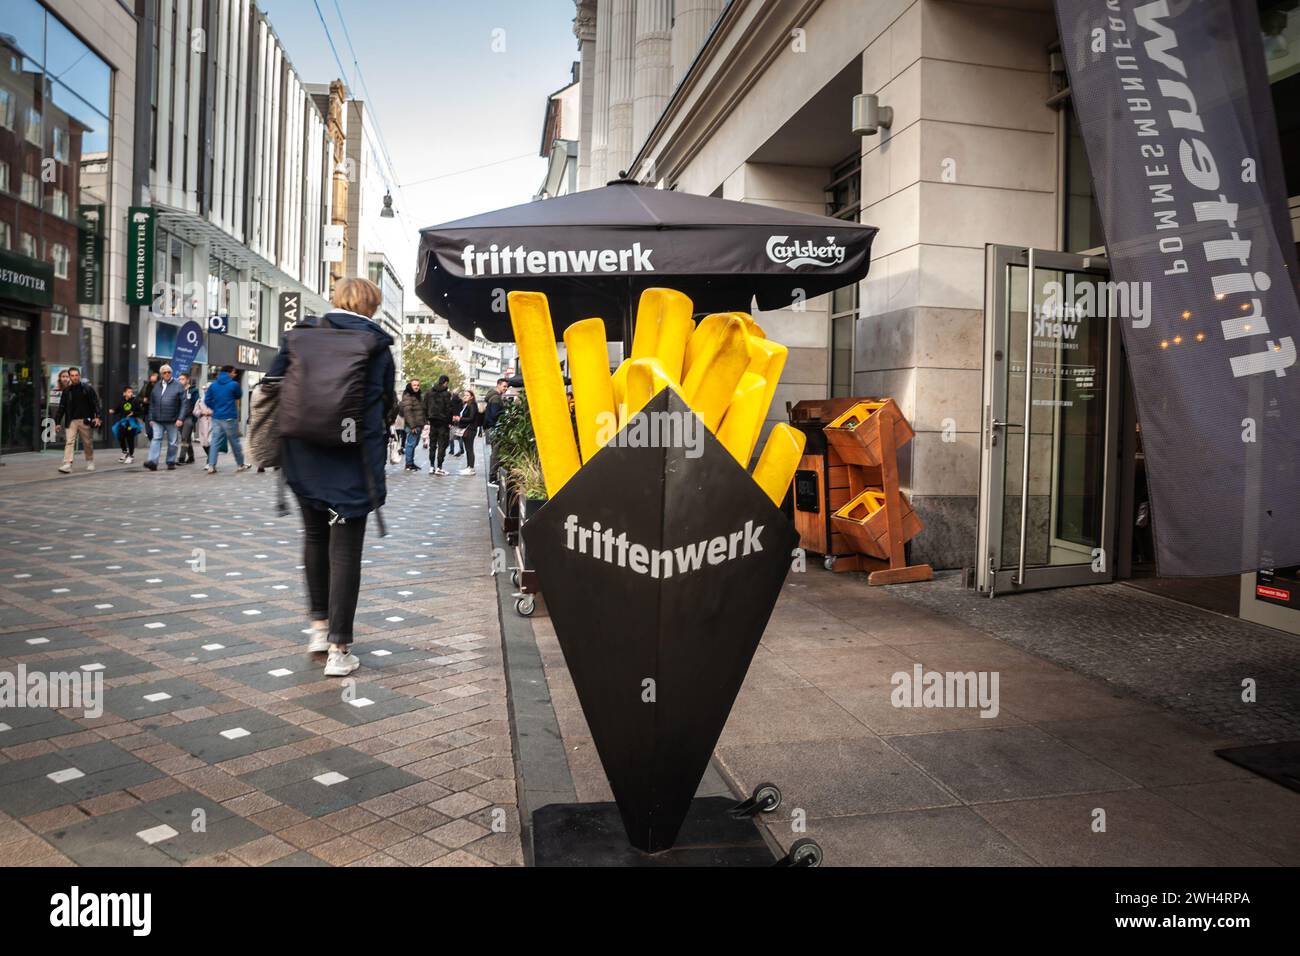 picture of a Frittenwerk logo on their local restaurant in Essen, Germany. Frittenwerk is a German fast food specialized in fries. Frittenwerk is a fa Stock Photo